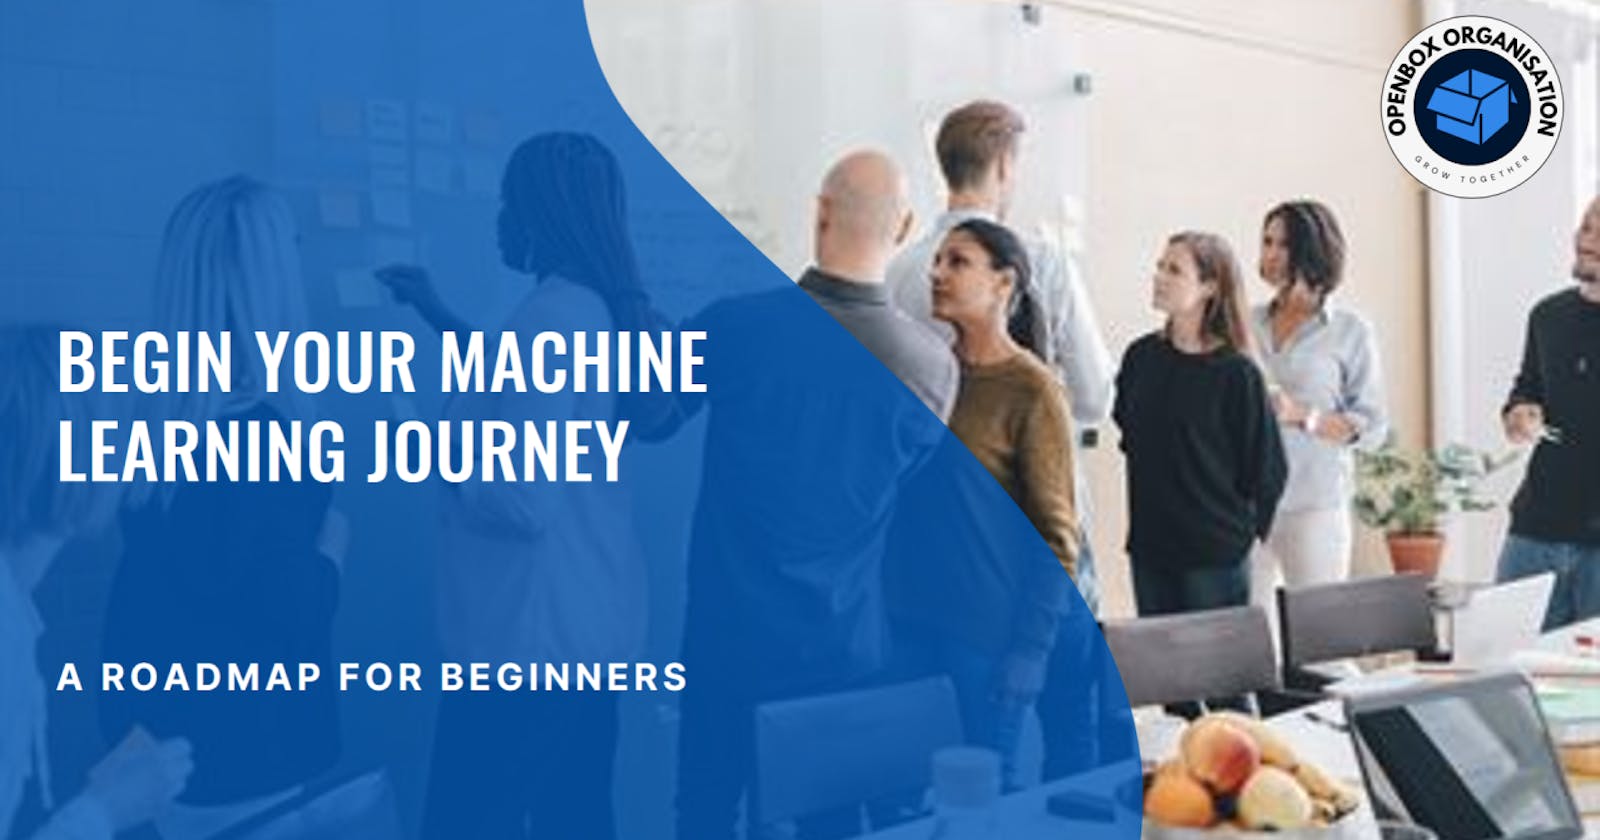 Your Machine Learning Journey Starts Here: A Roadmap for Beginners